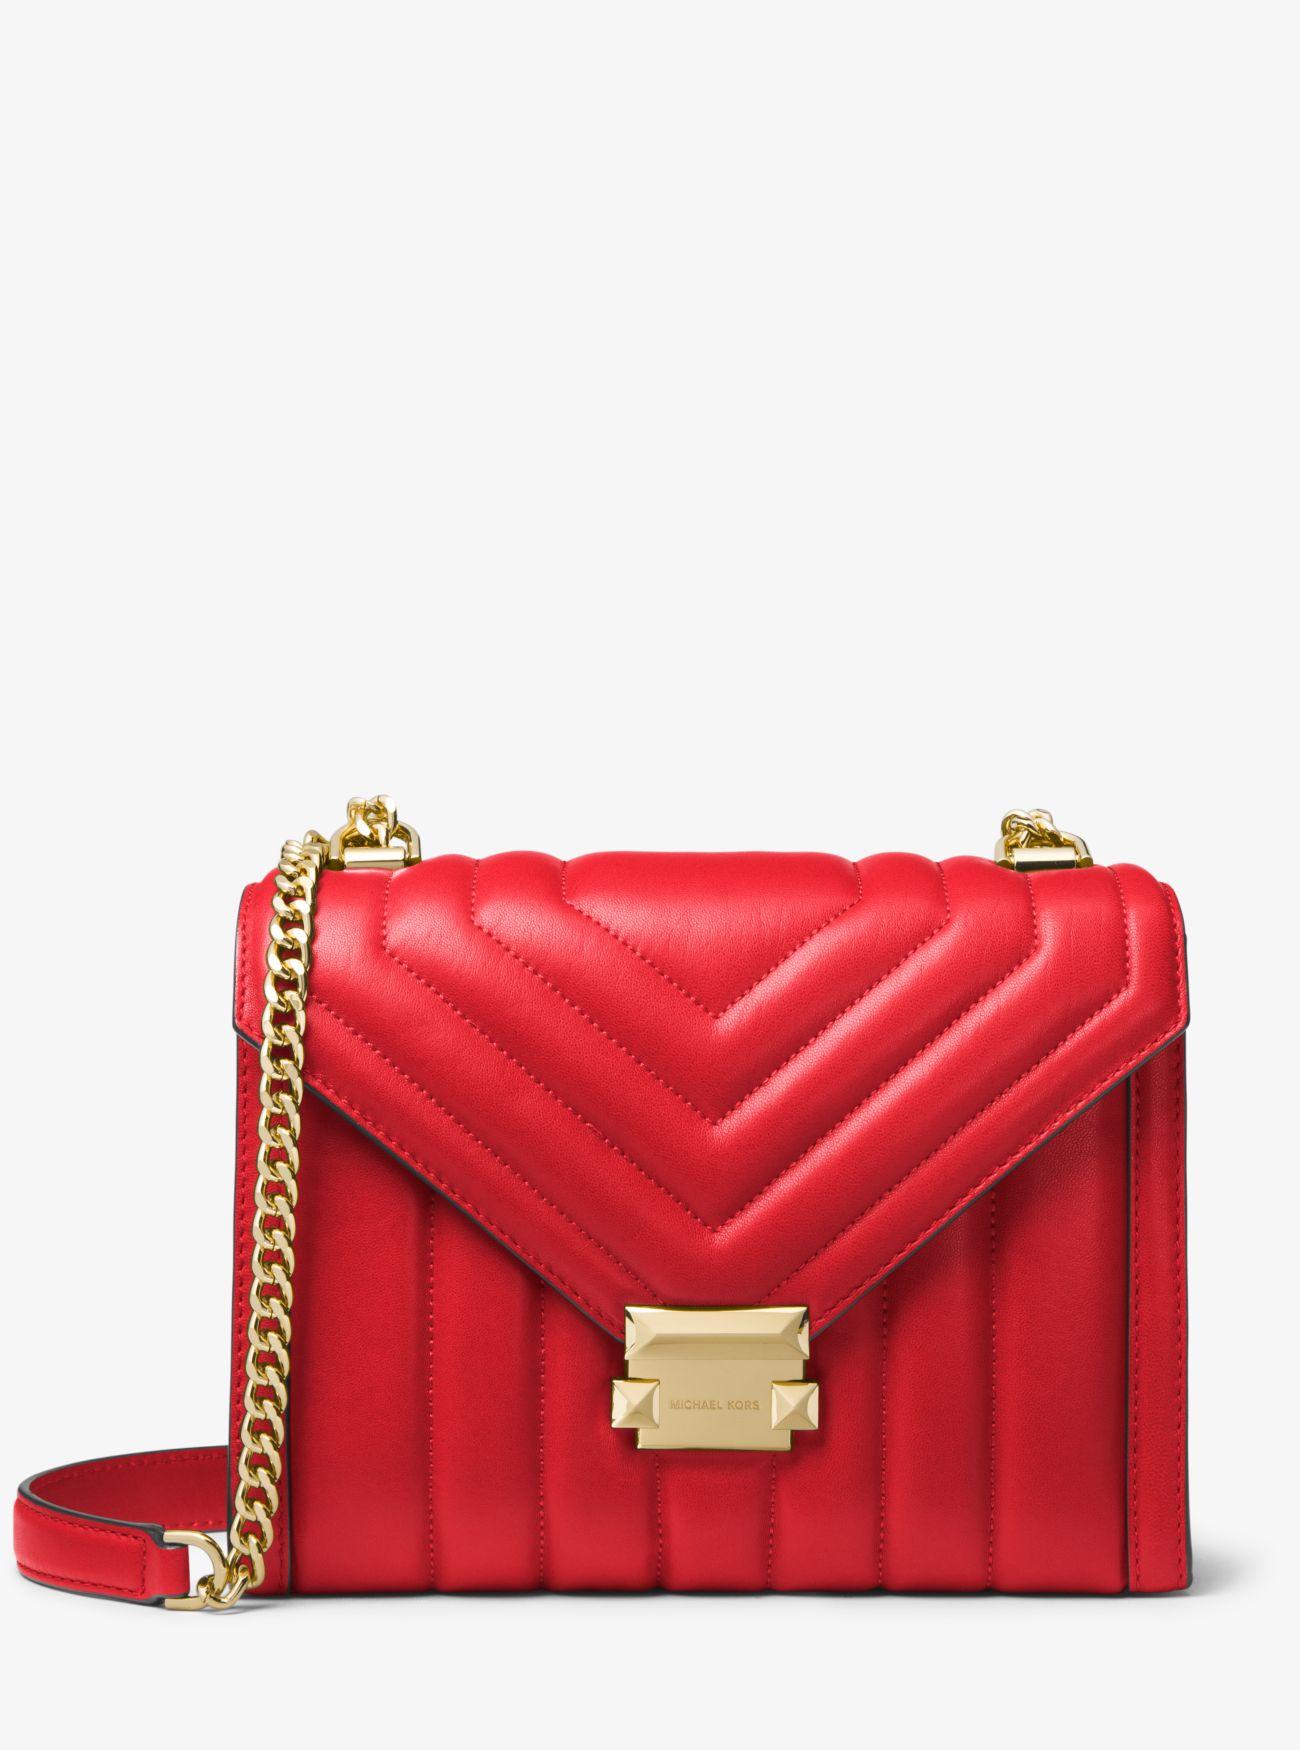 MICHAEL Michael Kors Whitney Large Quilted Leather Convertible Shoulder Bag in Red - Lyst